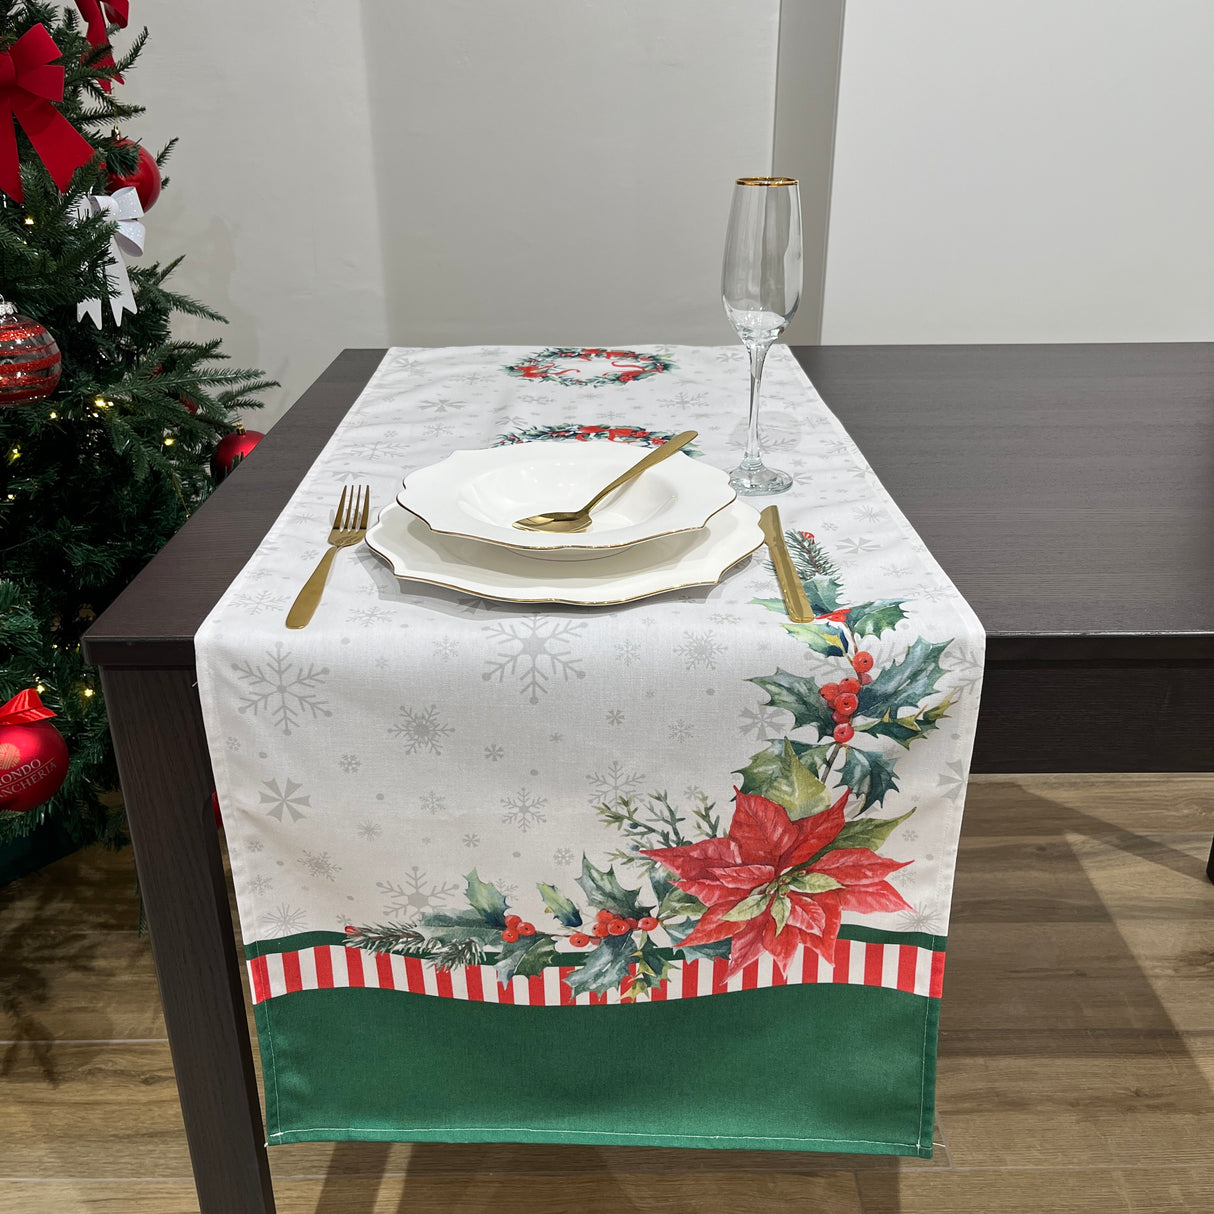 Runner TRADITIONAL CHRISTMAS 1 By Casa Anversa (Natale)